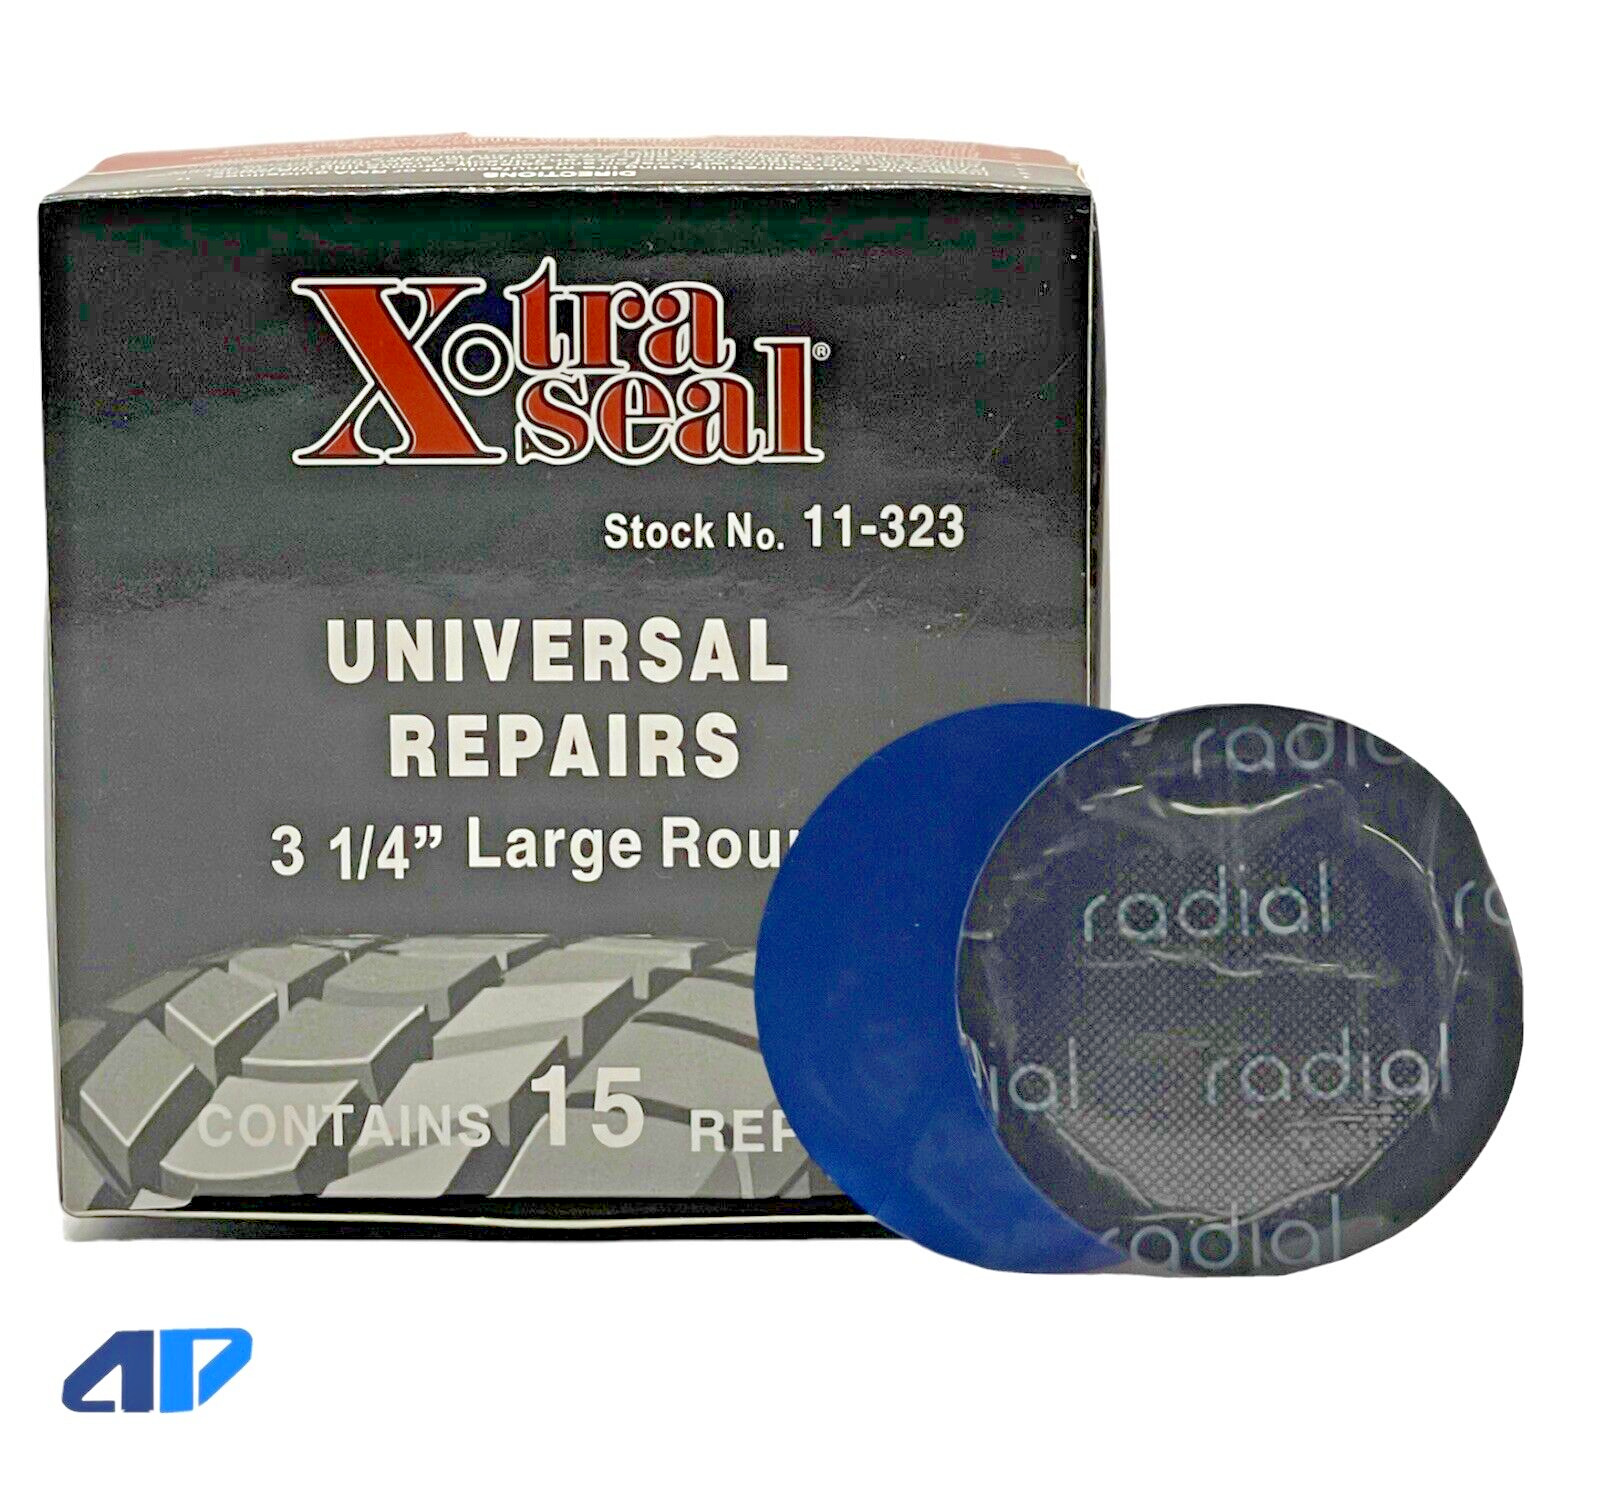 Xtra Seal 11-323 Large 3-1/4” Round Universal Patch Radial Tire Repair USA